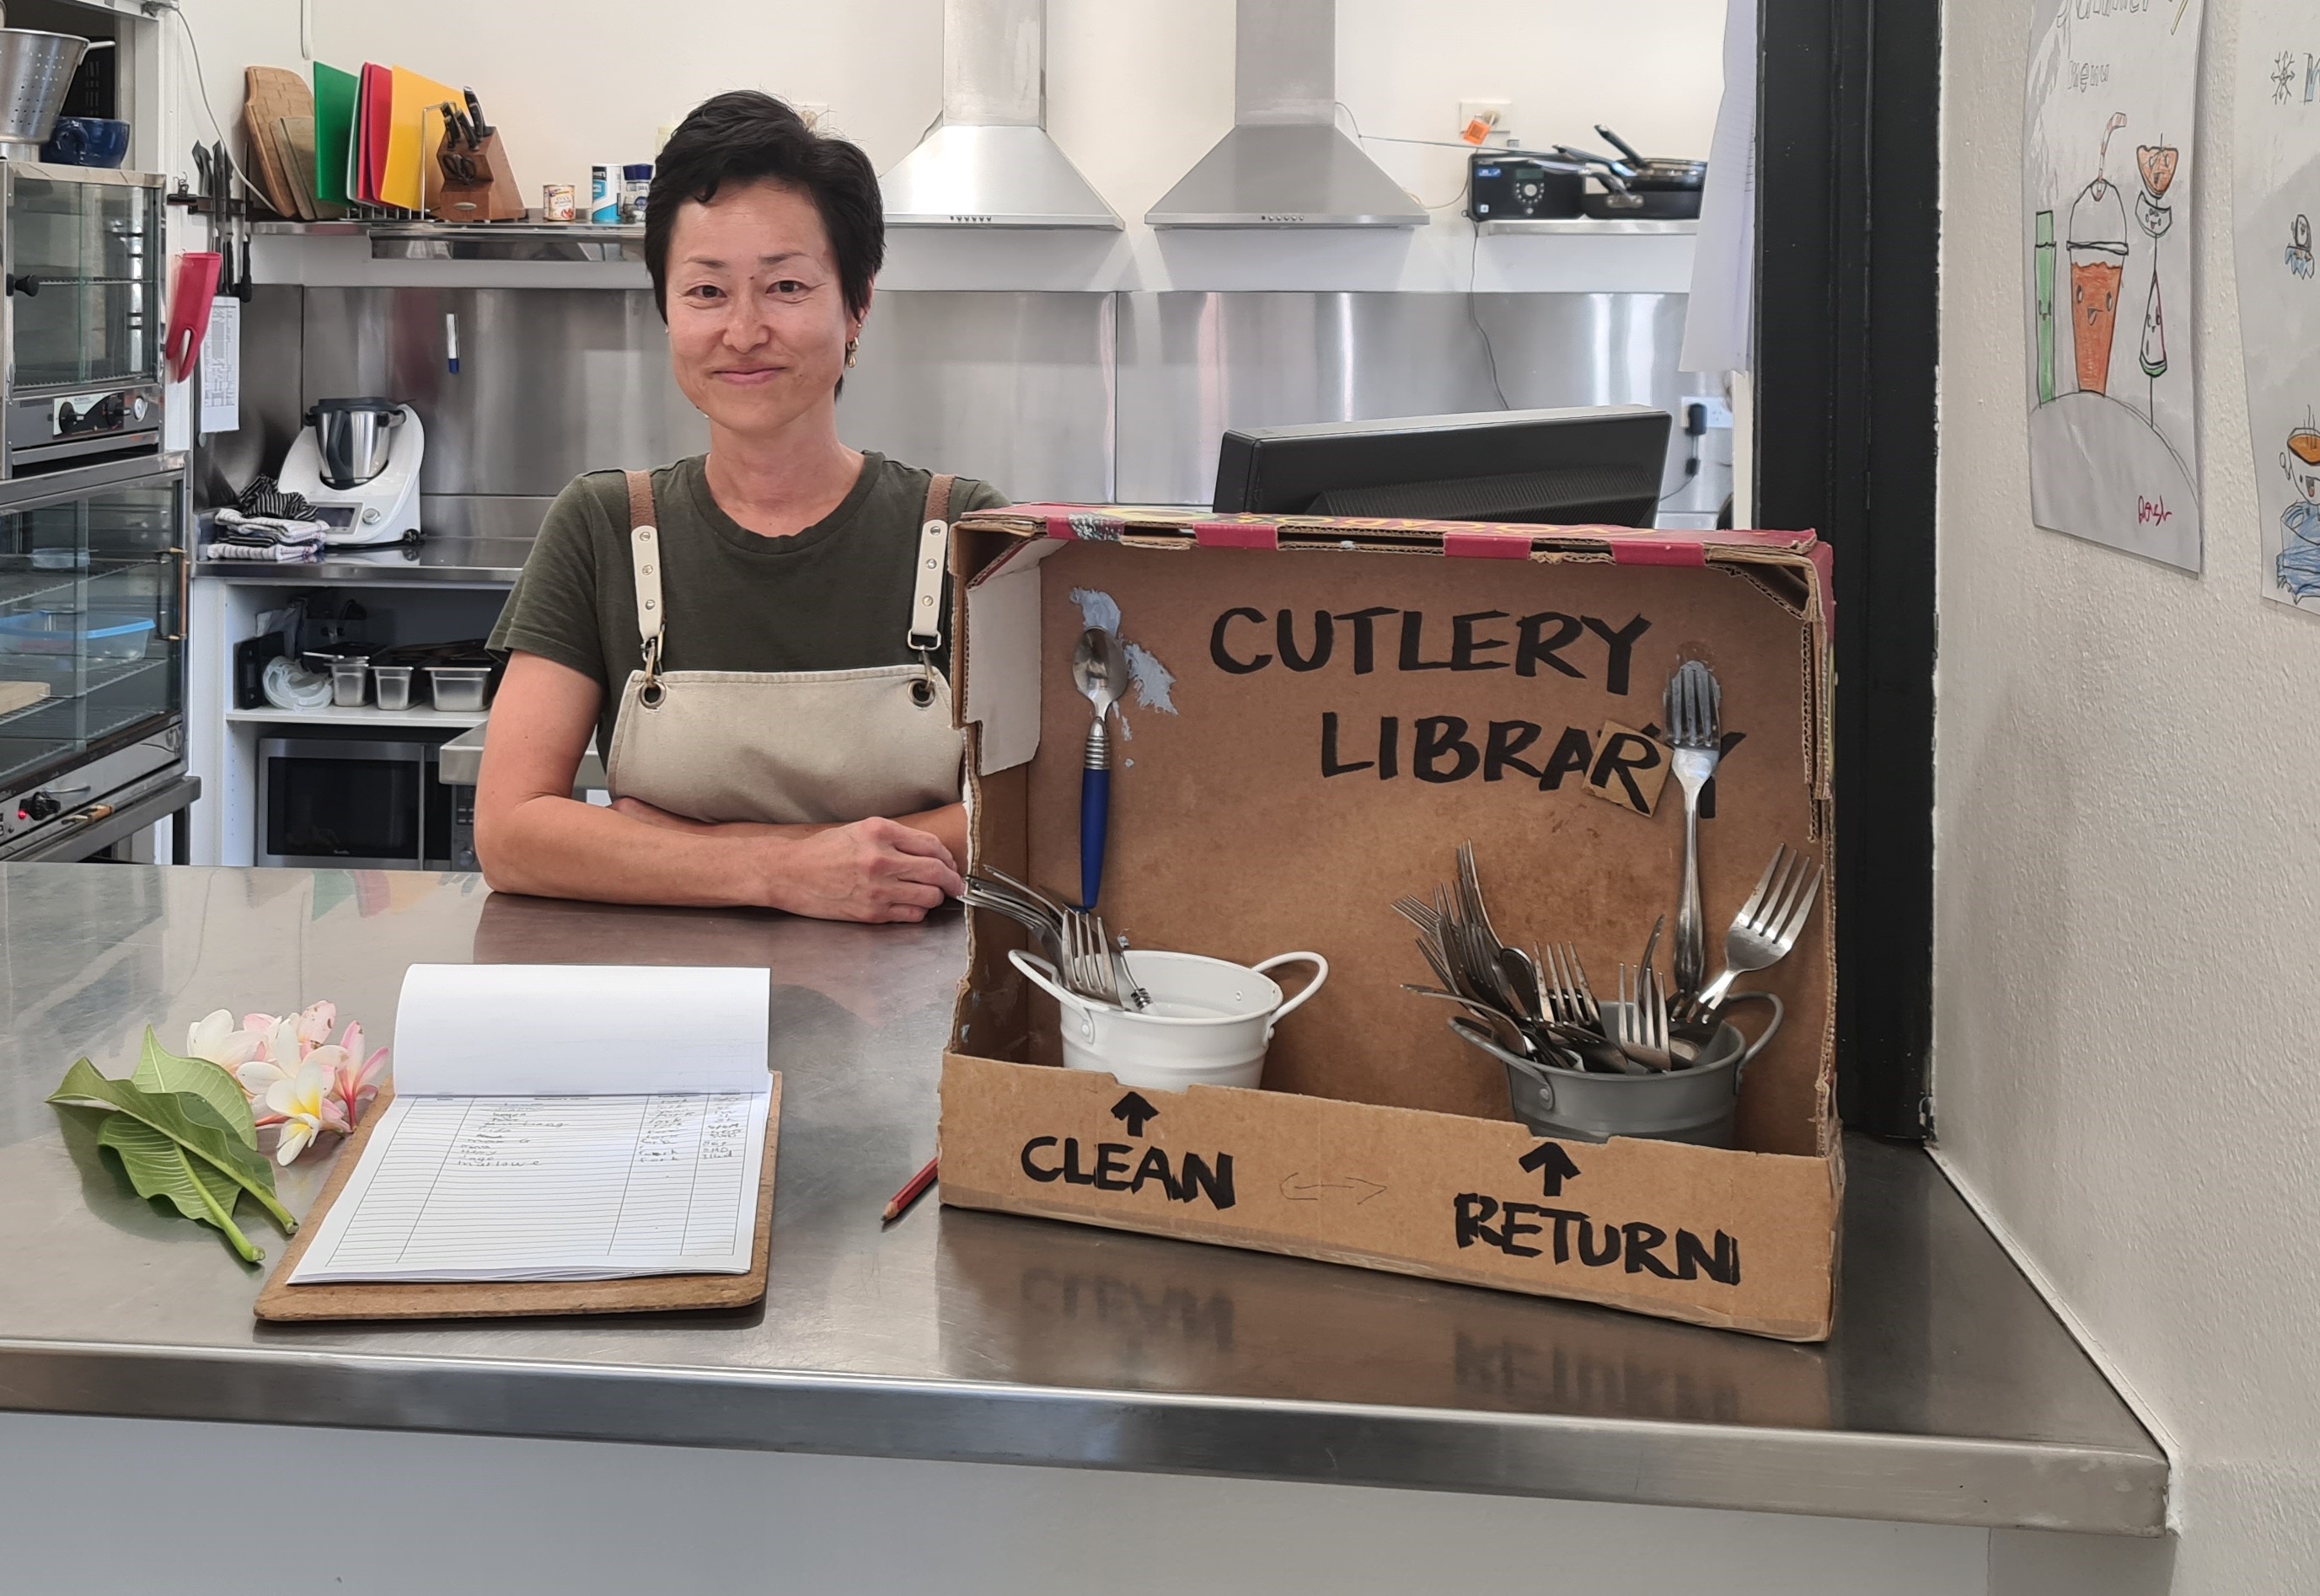 Canteen manager Kai with cutlery library on counter